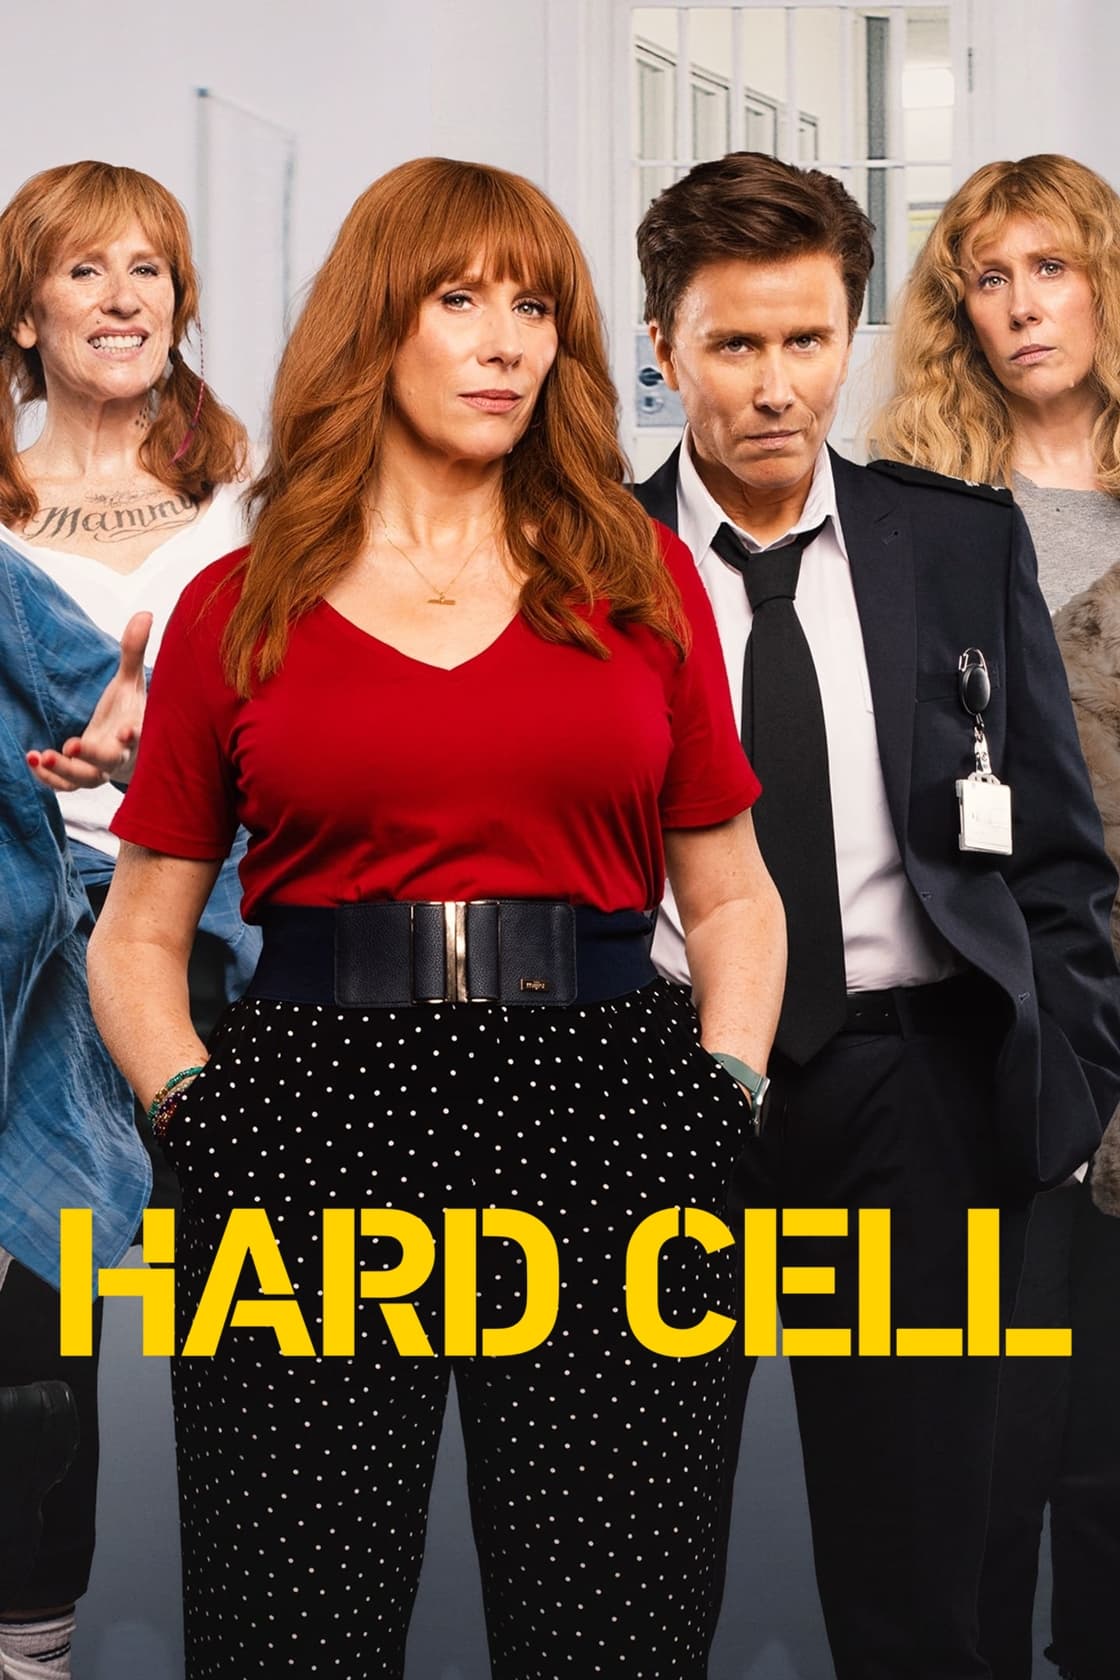 Hard Cell TV Shows About Mockumentary